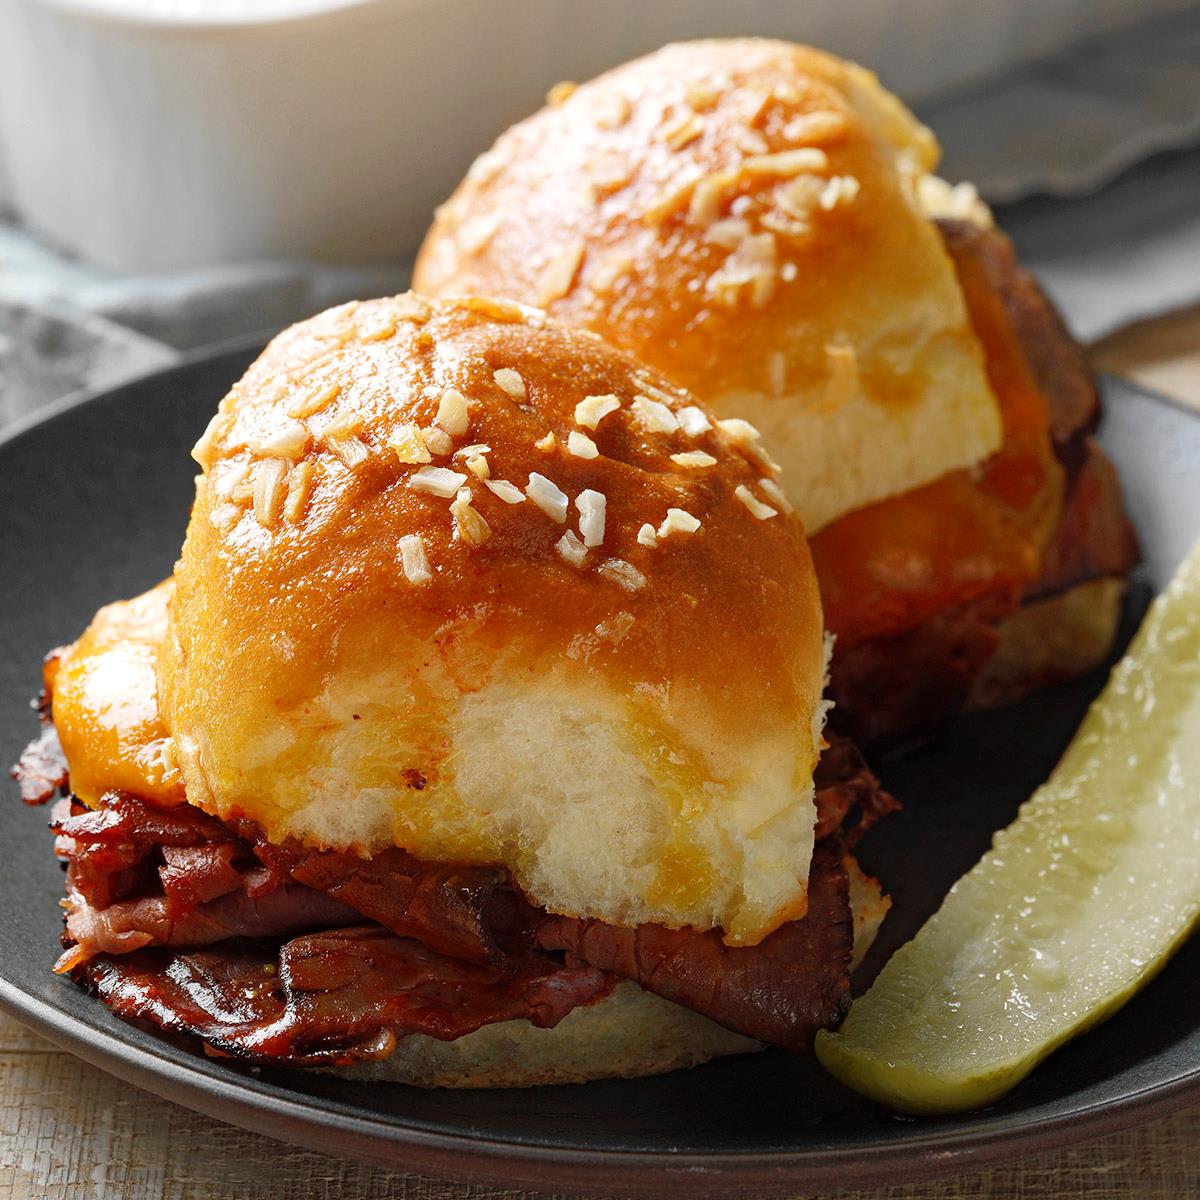 Arby’s Beef and Cheddar Sliders